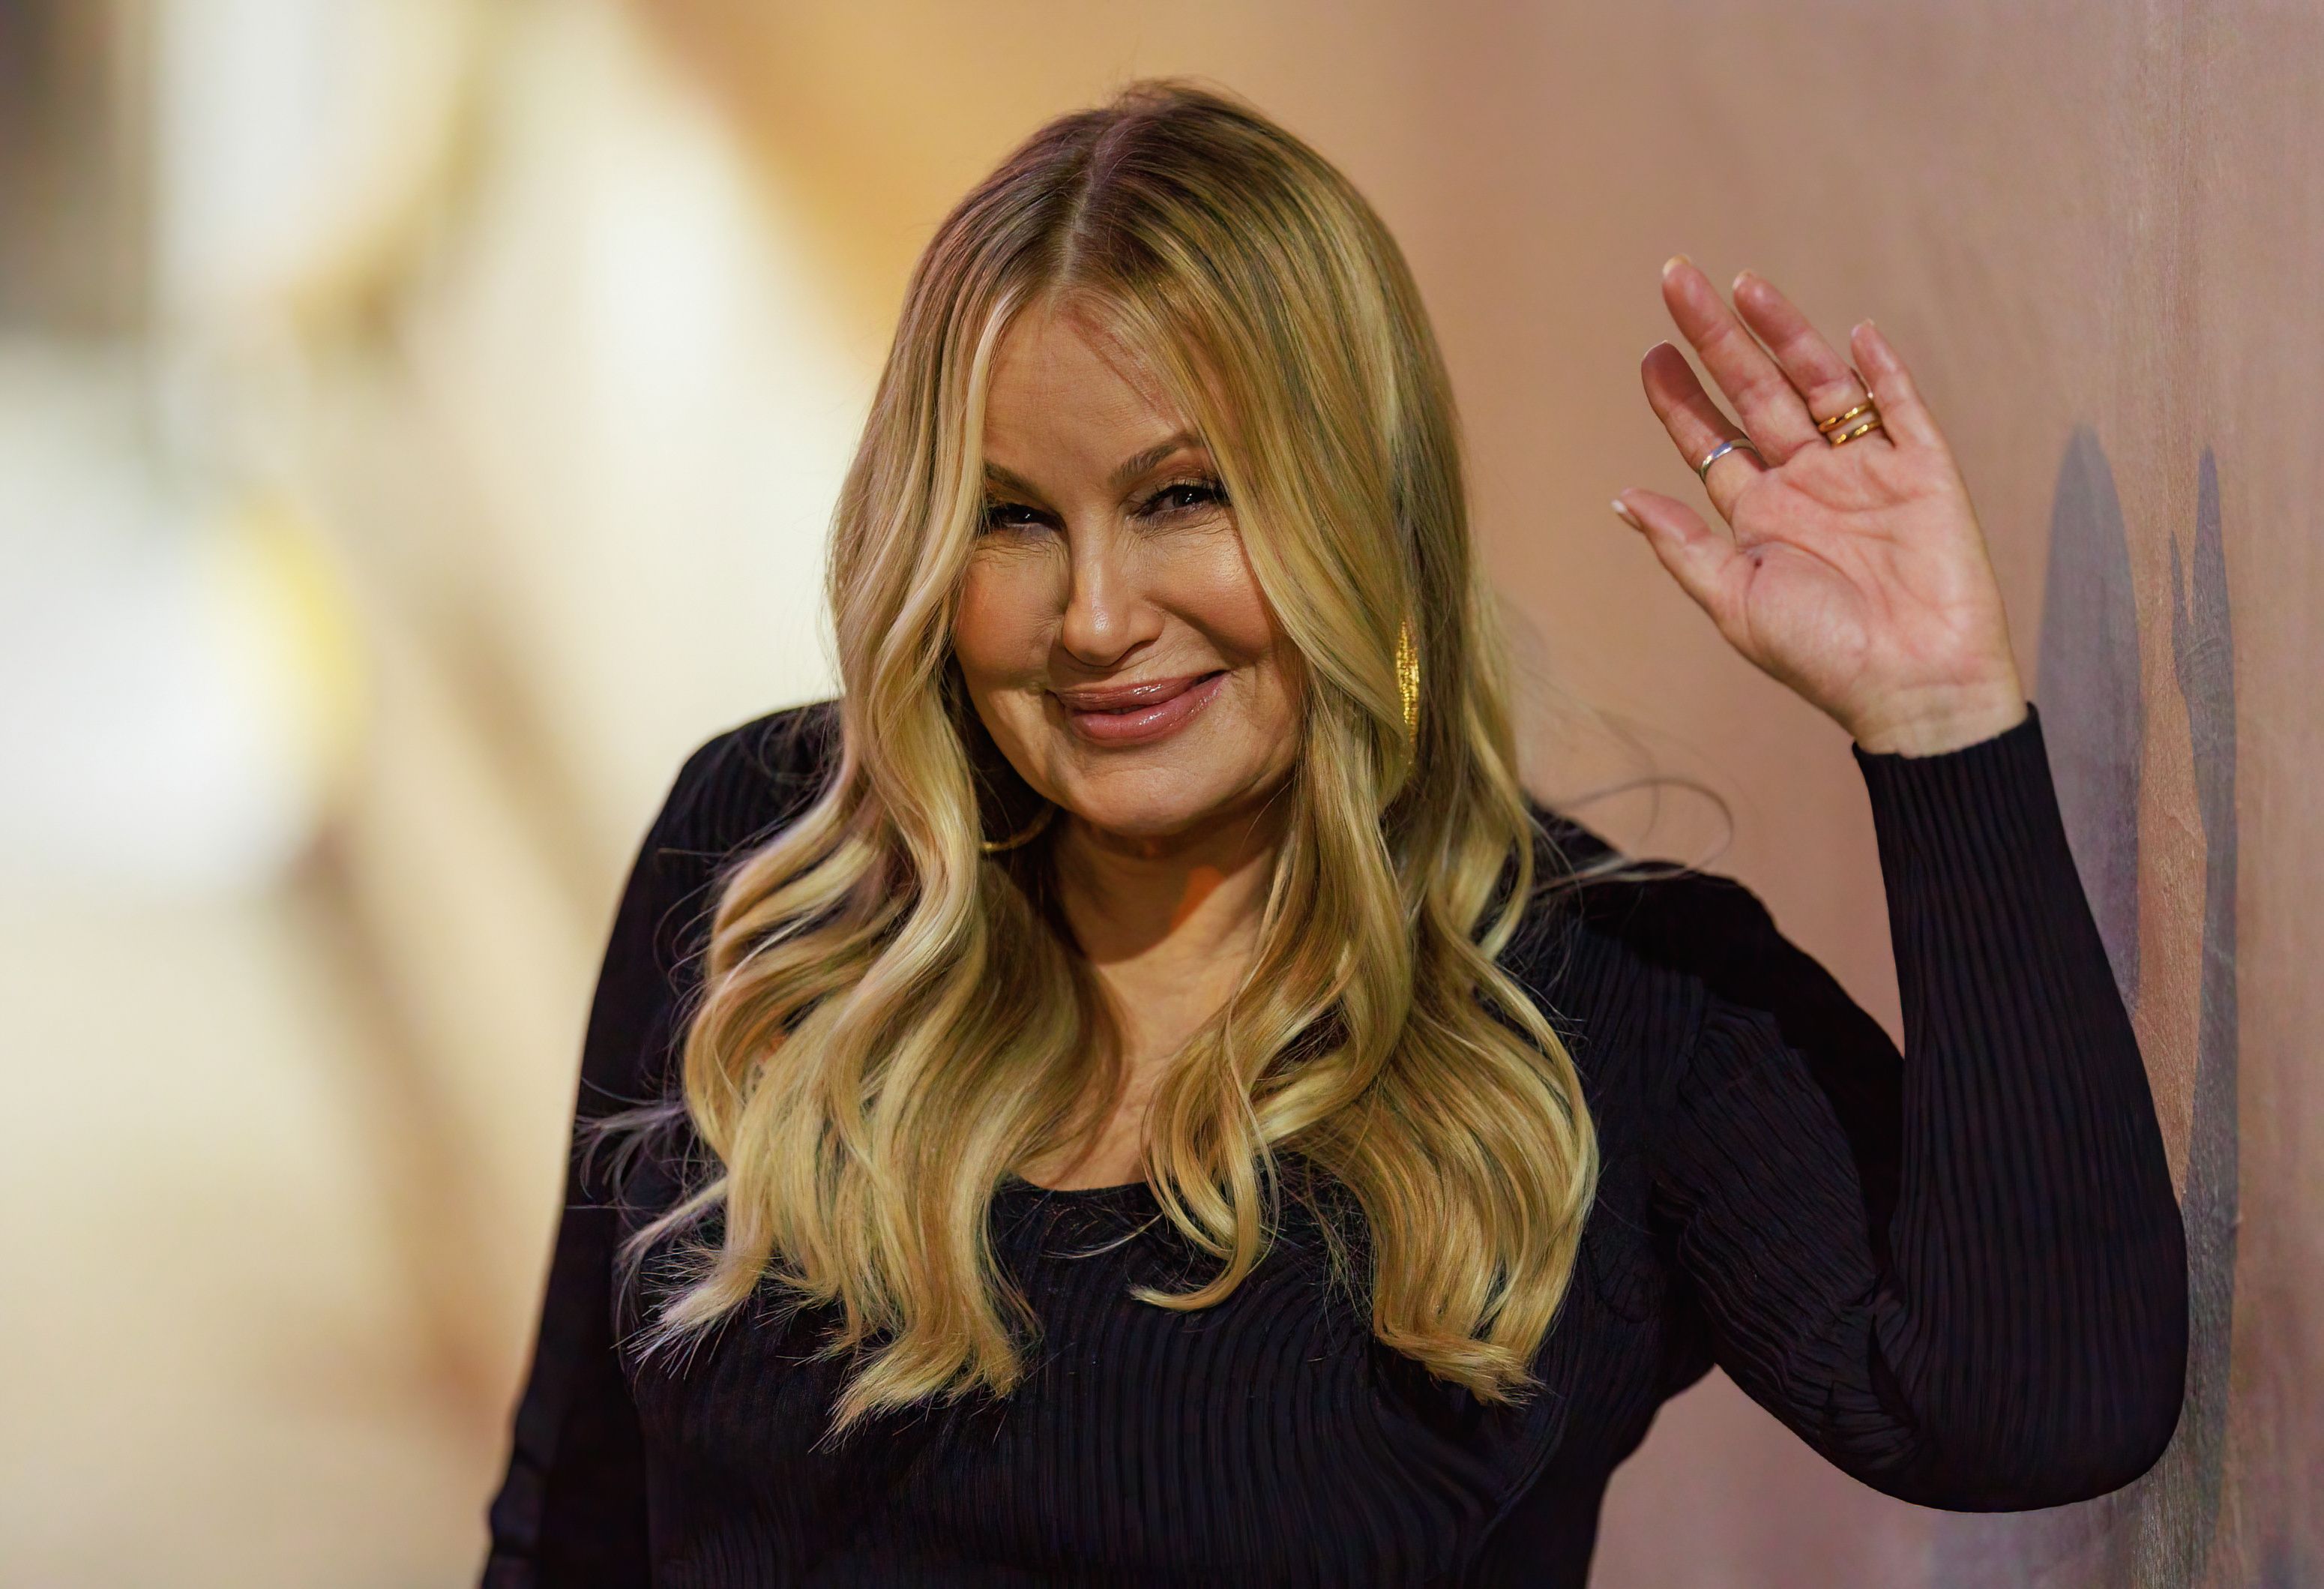 MILF' Jennifer Coolidge Slept With 200 People After American Pie